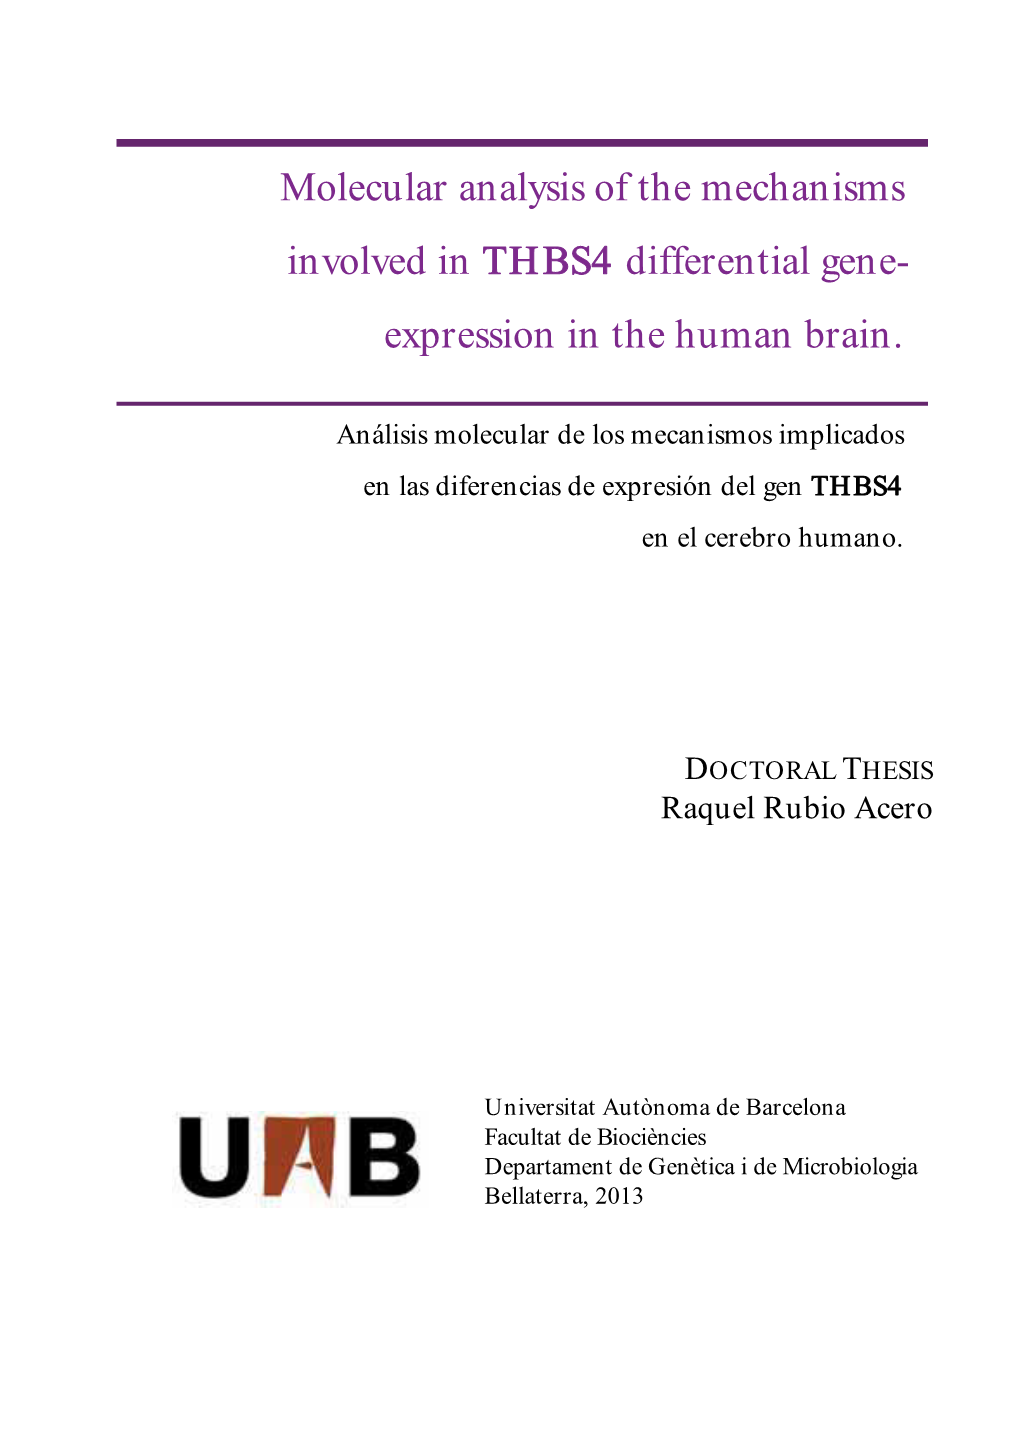 Molecular Analysis of the Mechanisms Involved in THBS4 Differential Gene- Expression in the Human Brain